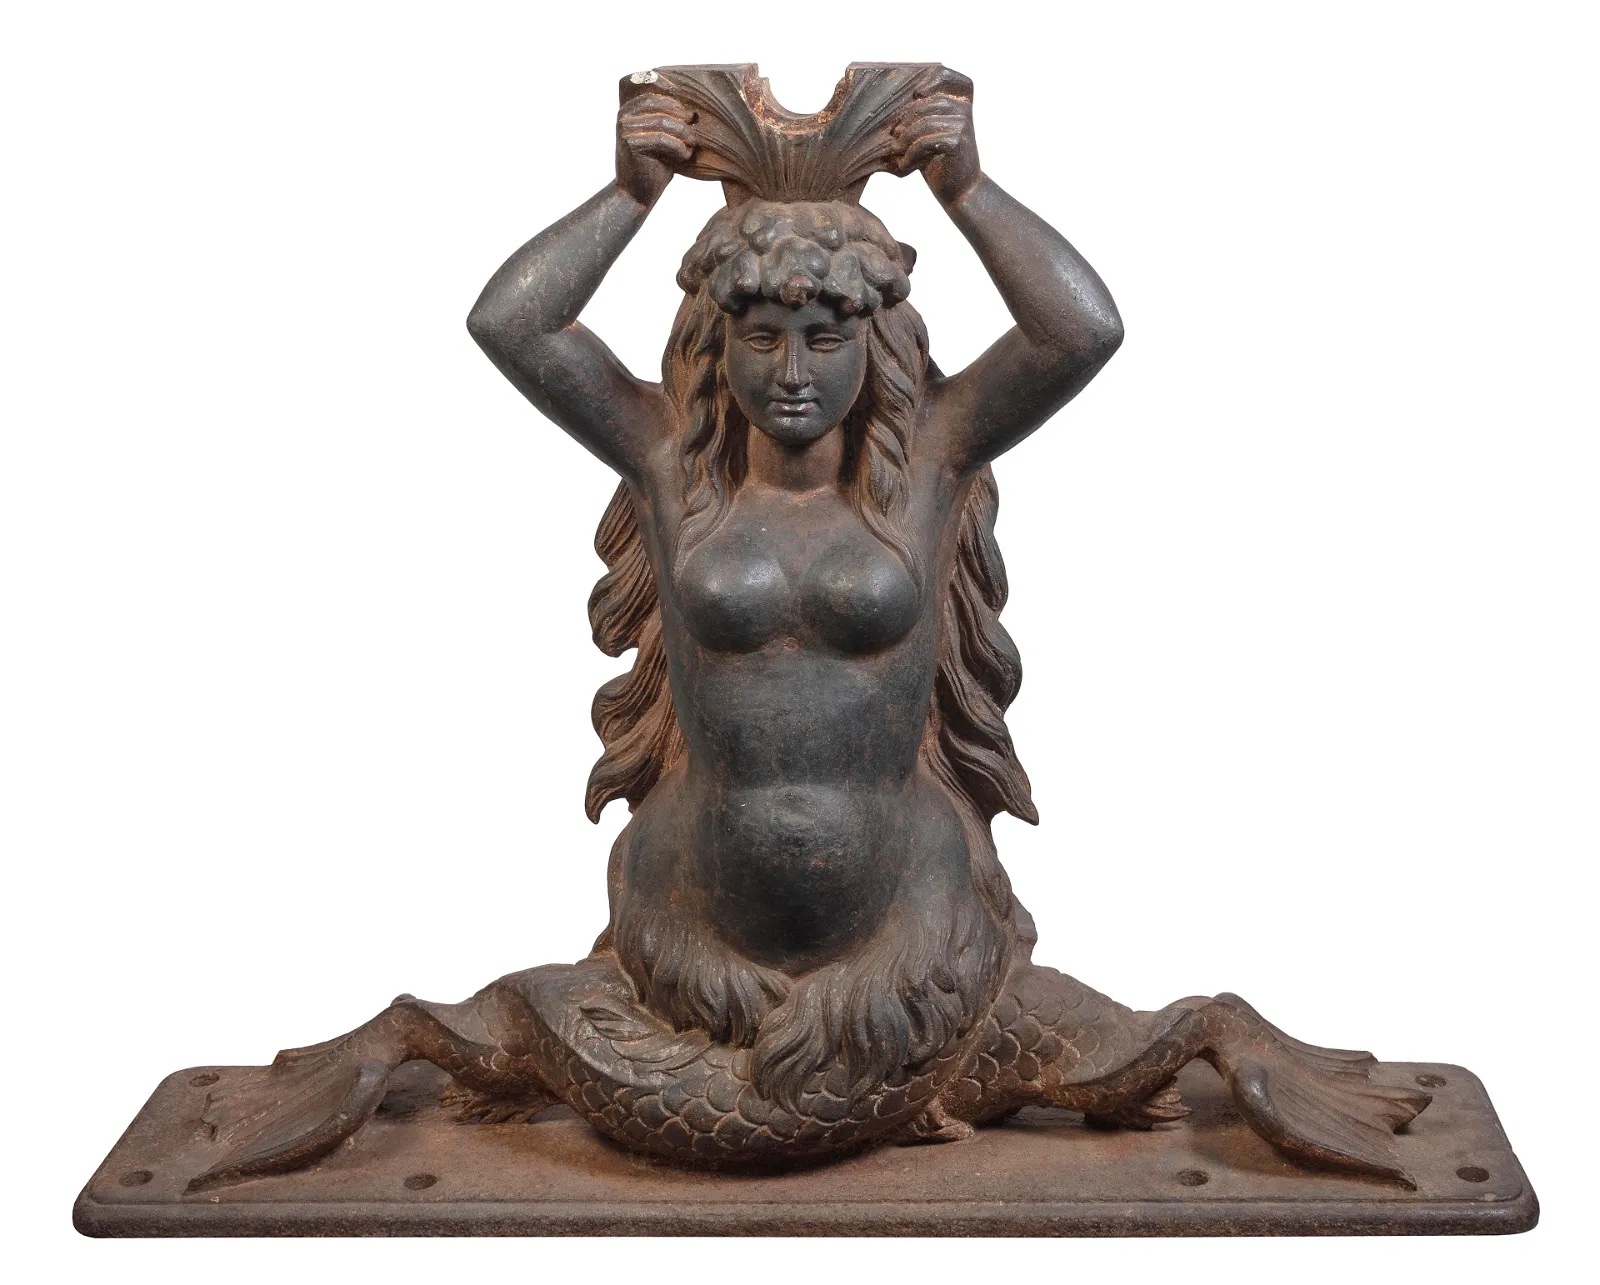 Ship’s wheel bracket helm in the form of a mermaid, estimated at $50,000-$70,000 at Eldred's.